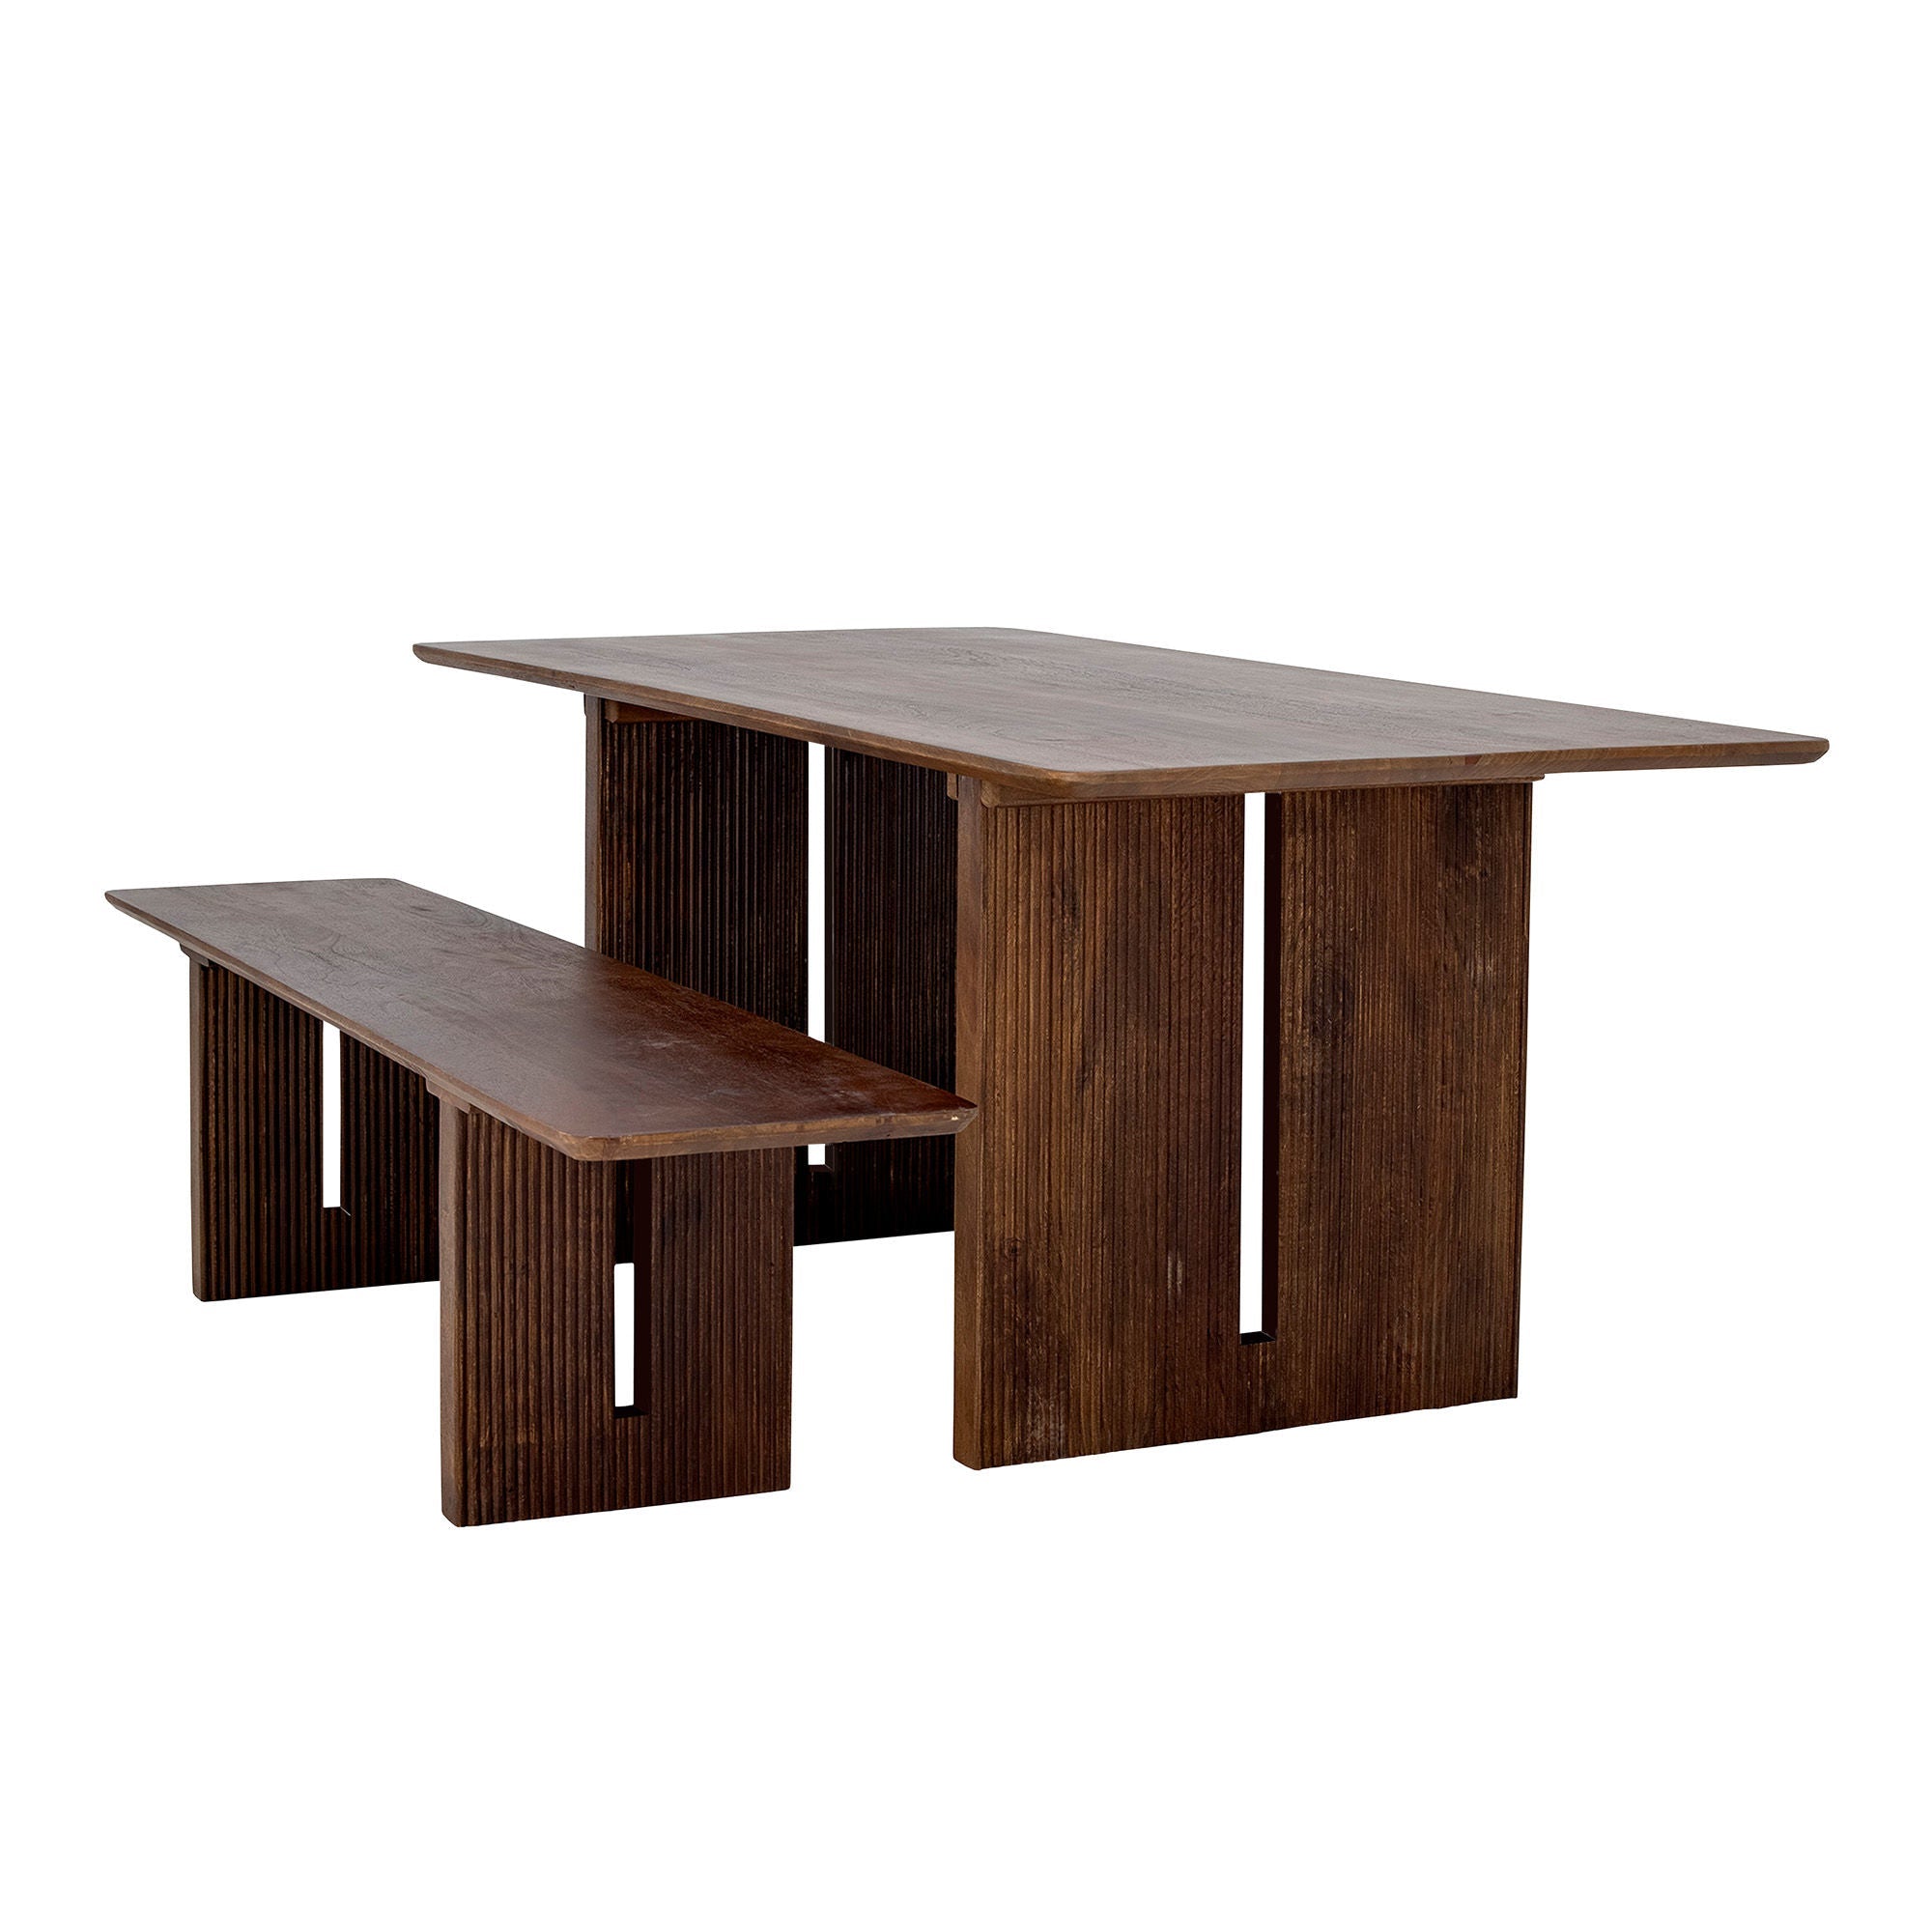 Creative Collection Milow Dining Table, Brown, Mango